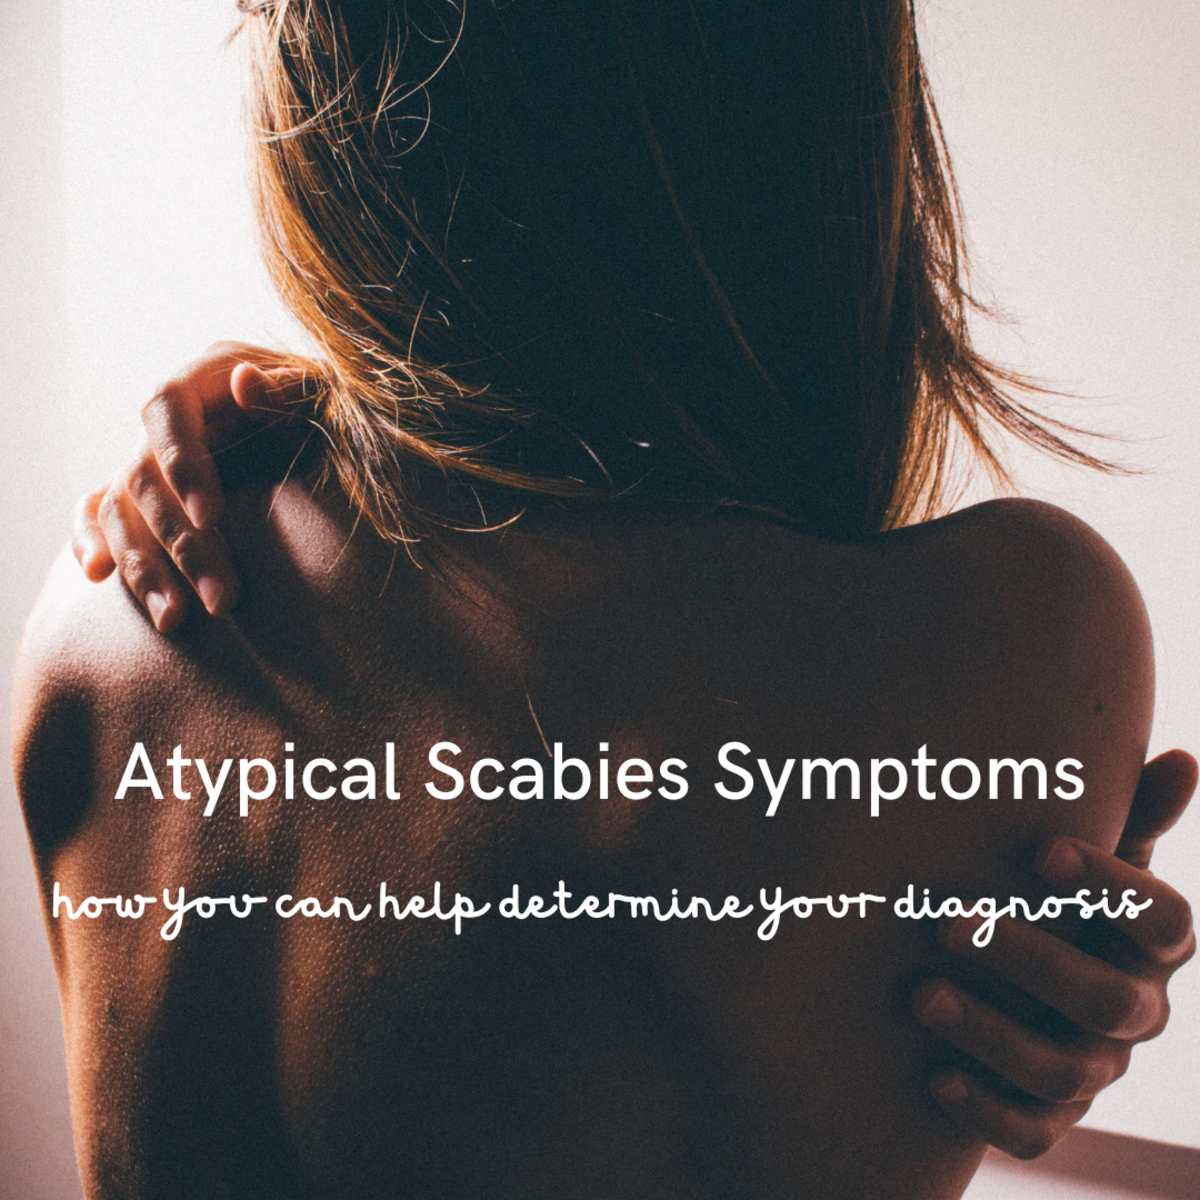 My Atypical Scabies Symptoms: Unusual Signs of Mites That Doctors Don't Recognize